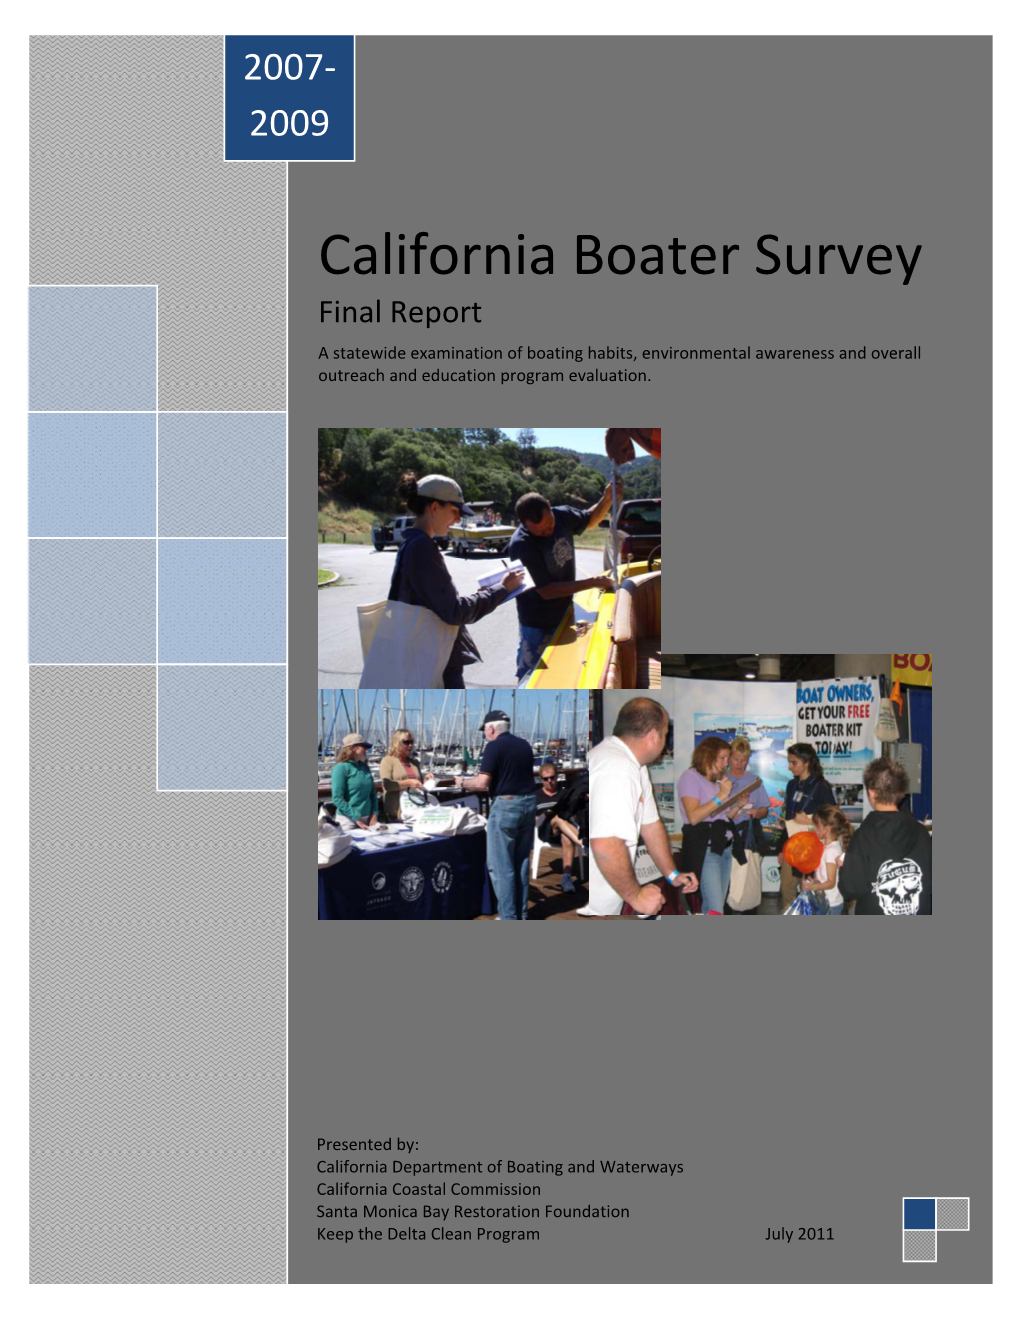 California Boater Survey Final Report a Statewide Examination of Boating Habits, Environmental Awareness and Overall Outreach and Education Program Evaluation